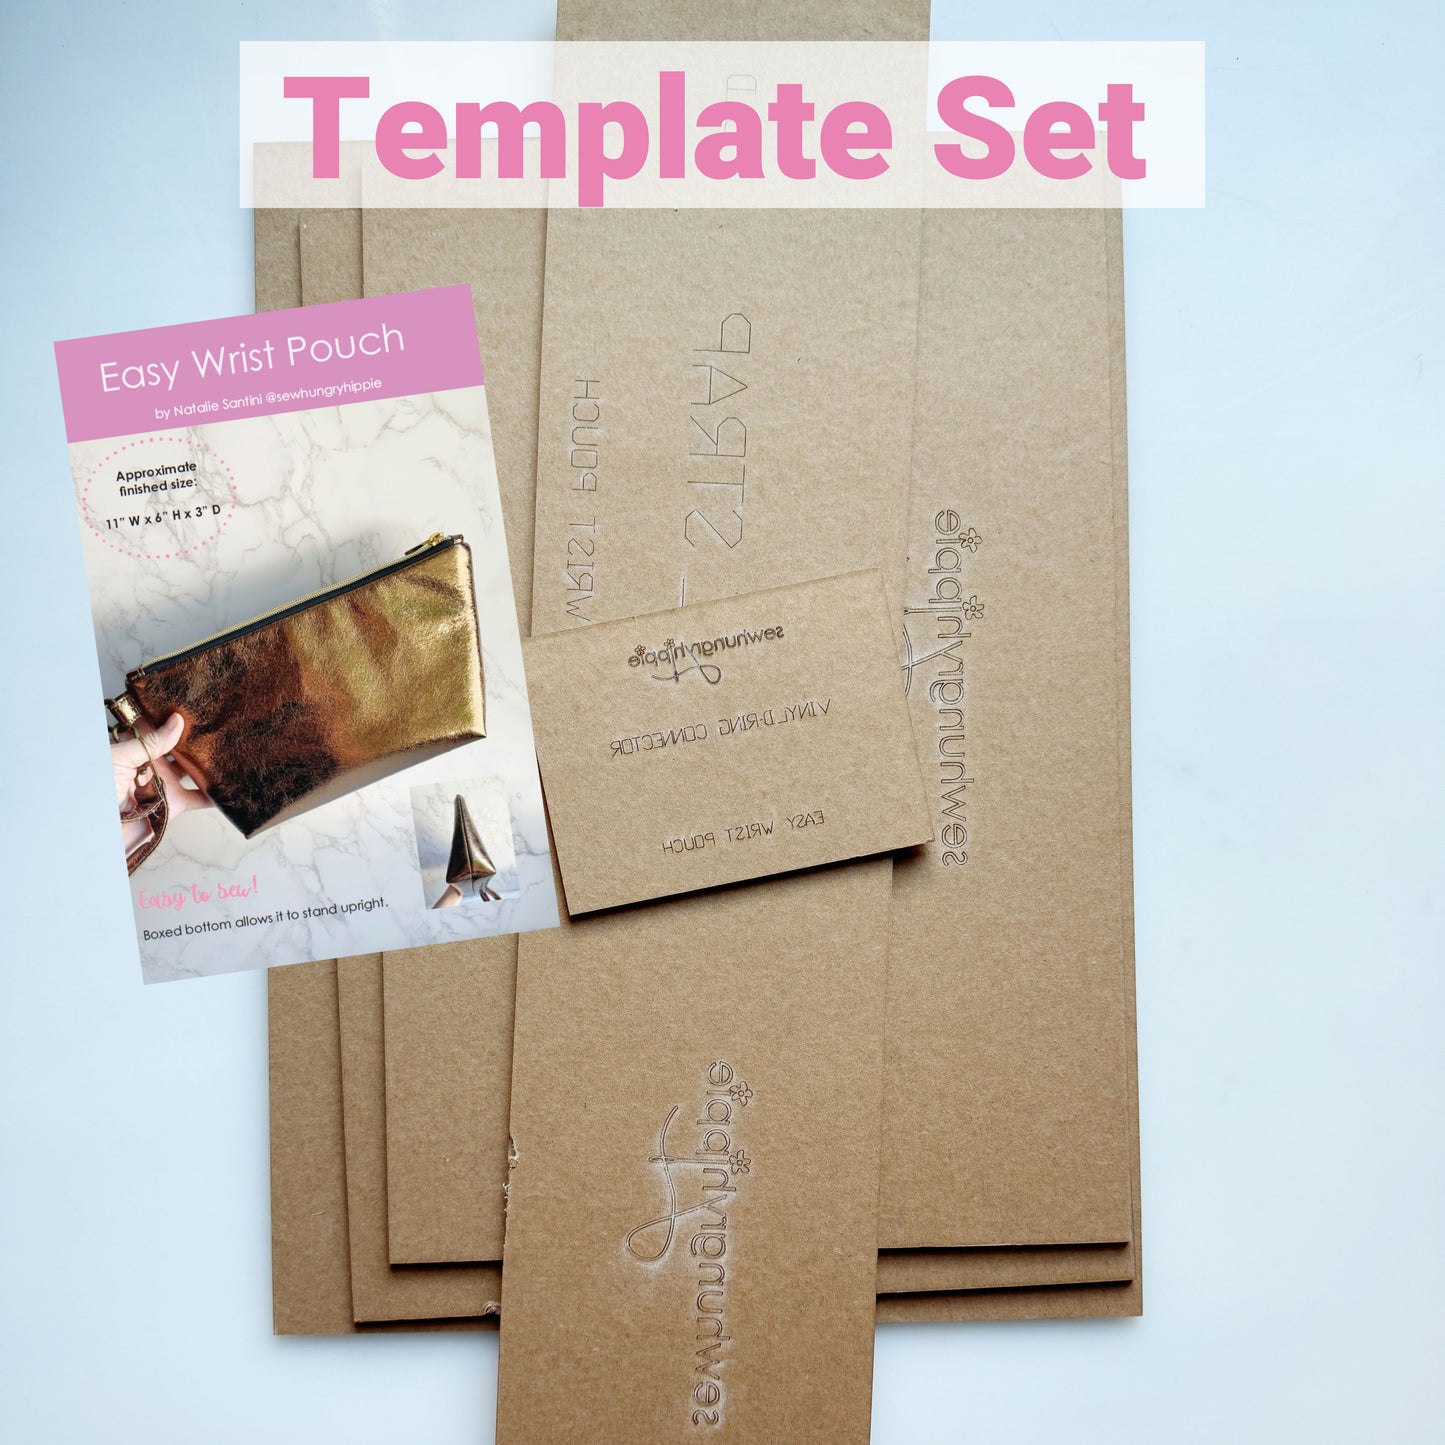 Easy Wrist Pouch Acrylic Template Set